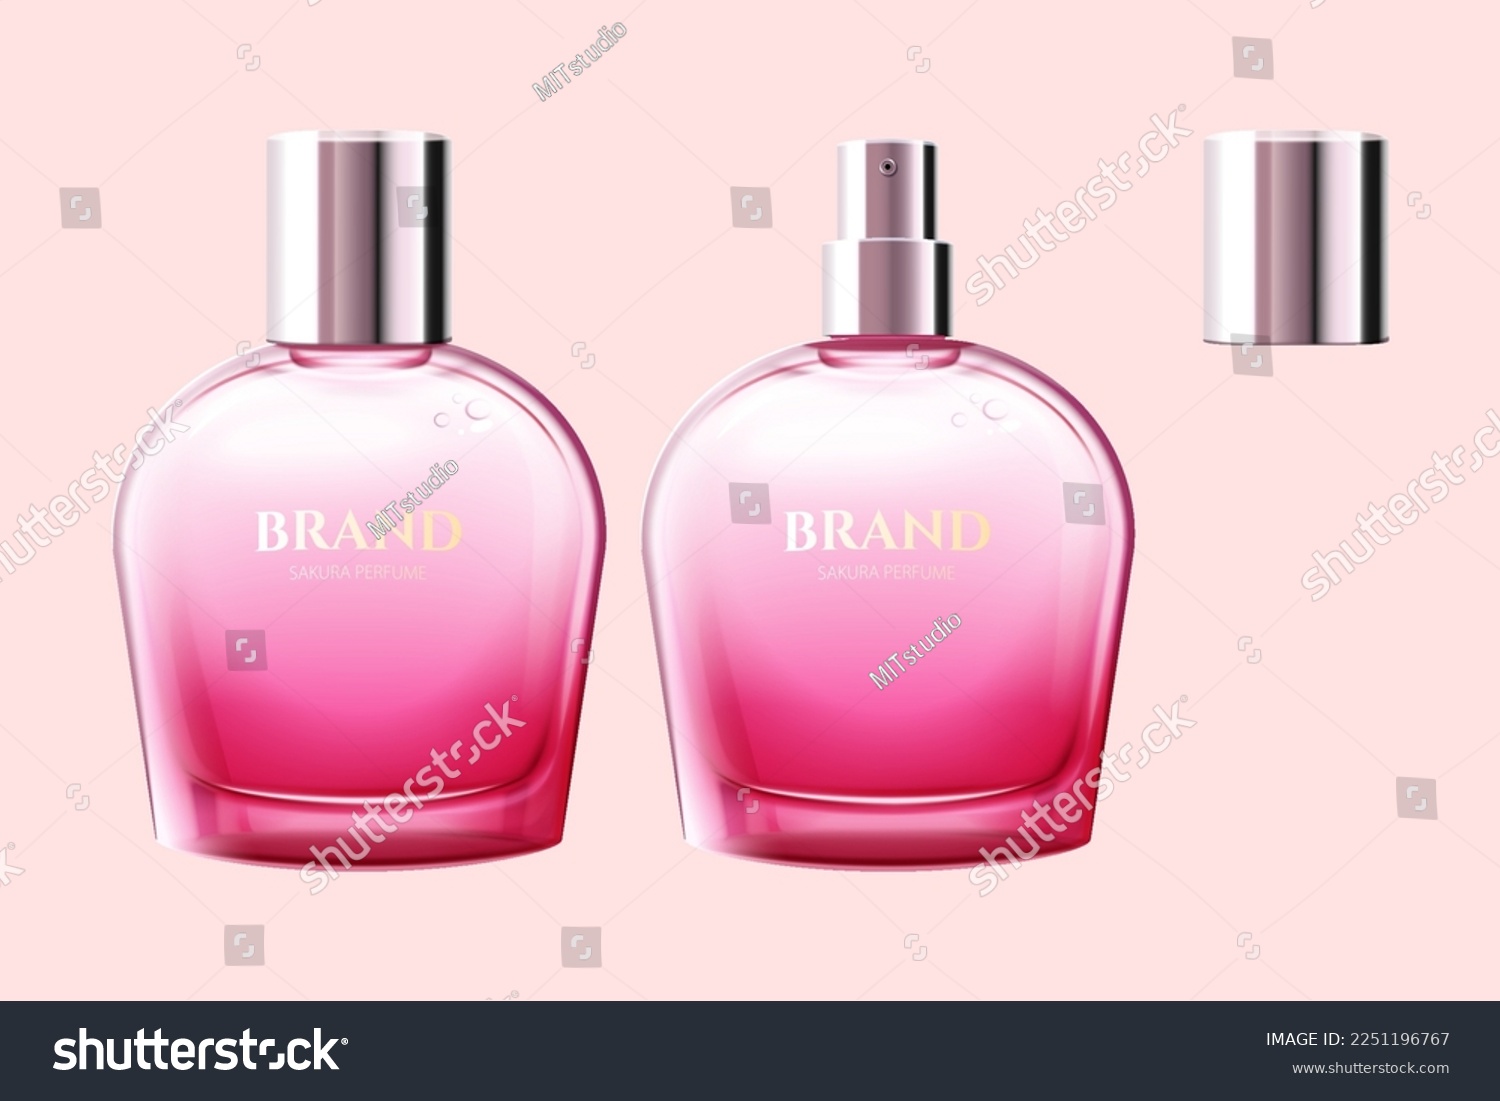 SVG of 3D illustration of beauty product mockup. Pink transparent perfume spray glass bottle with steel cap isolated on light pink background. svg